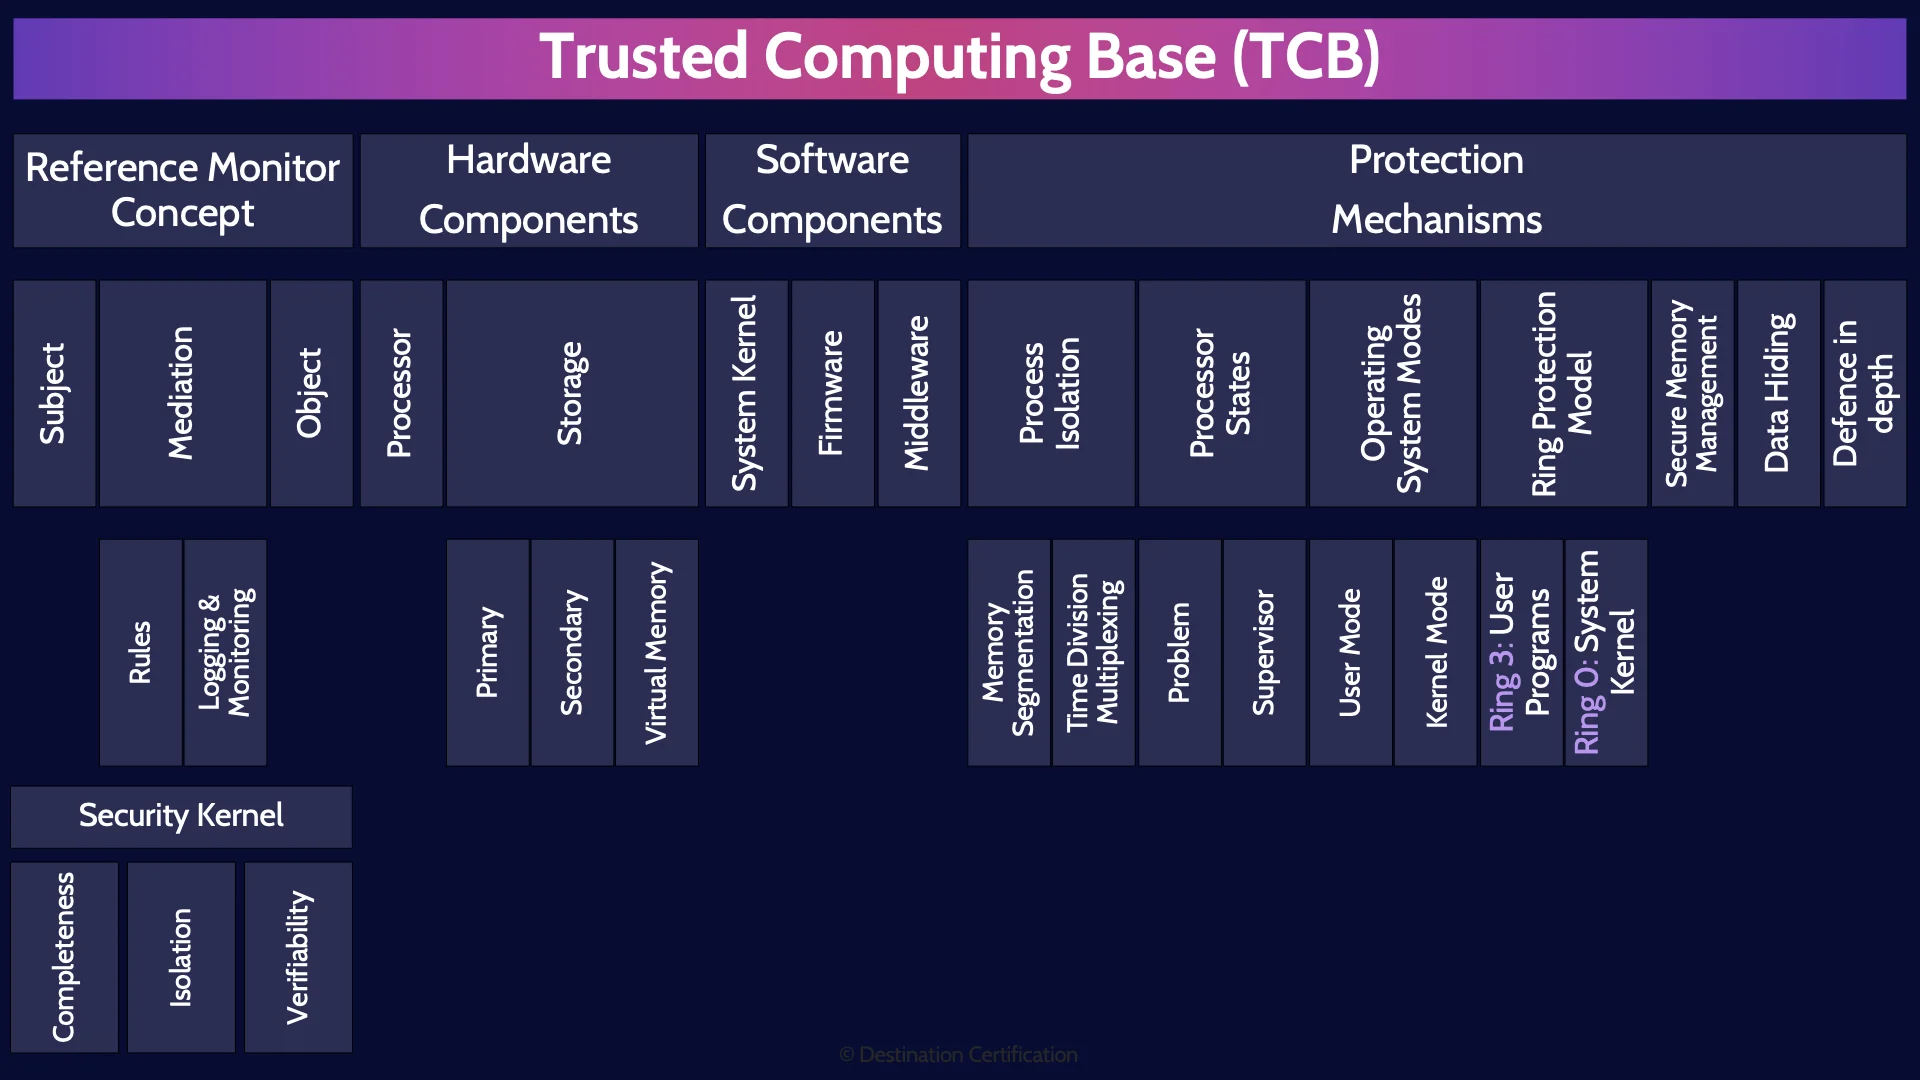 Image of trusted computing base (TCB) - Destination Certification